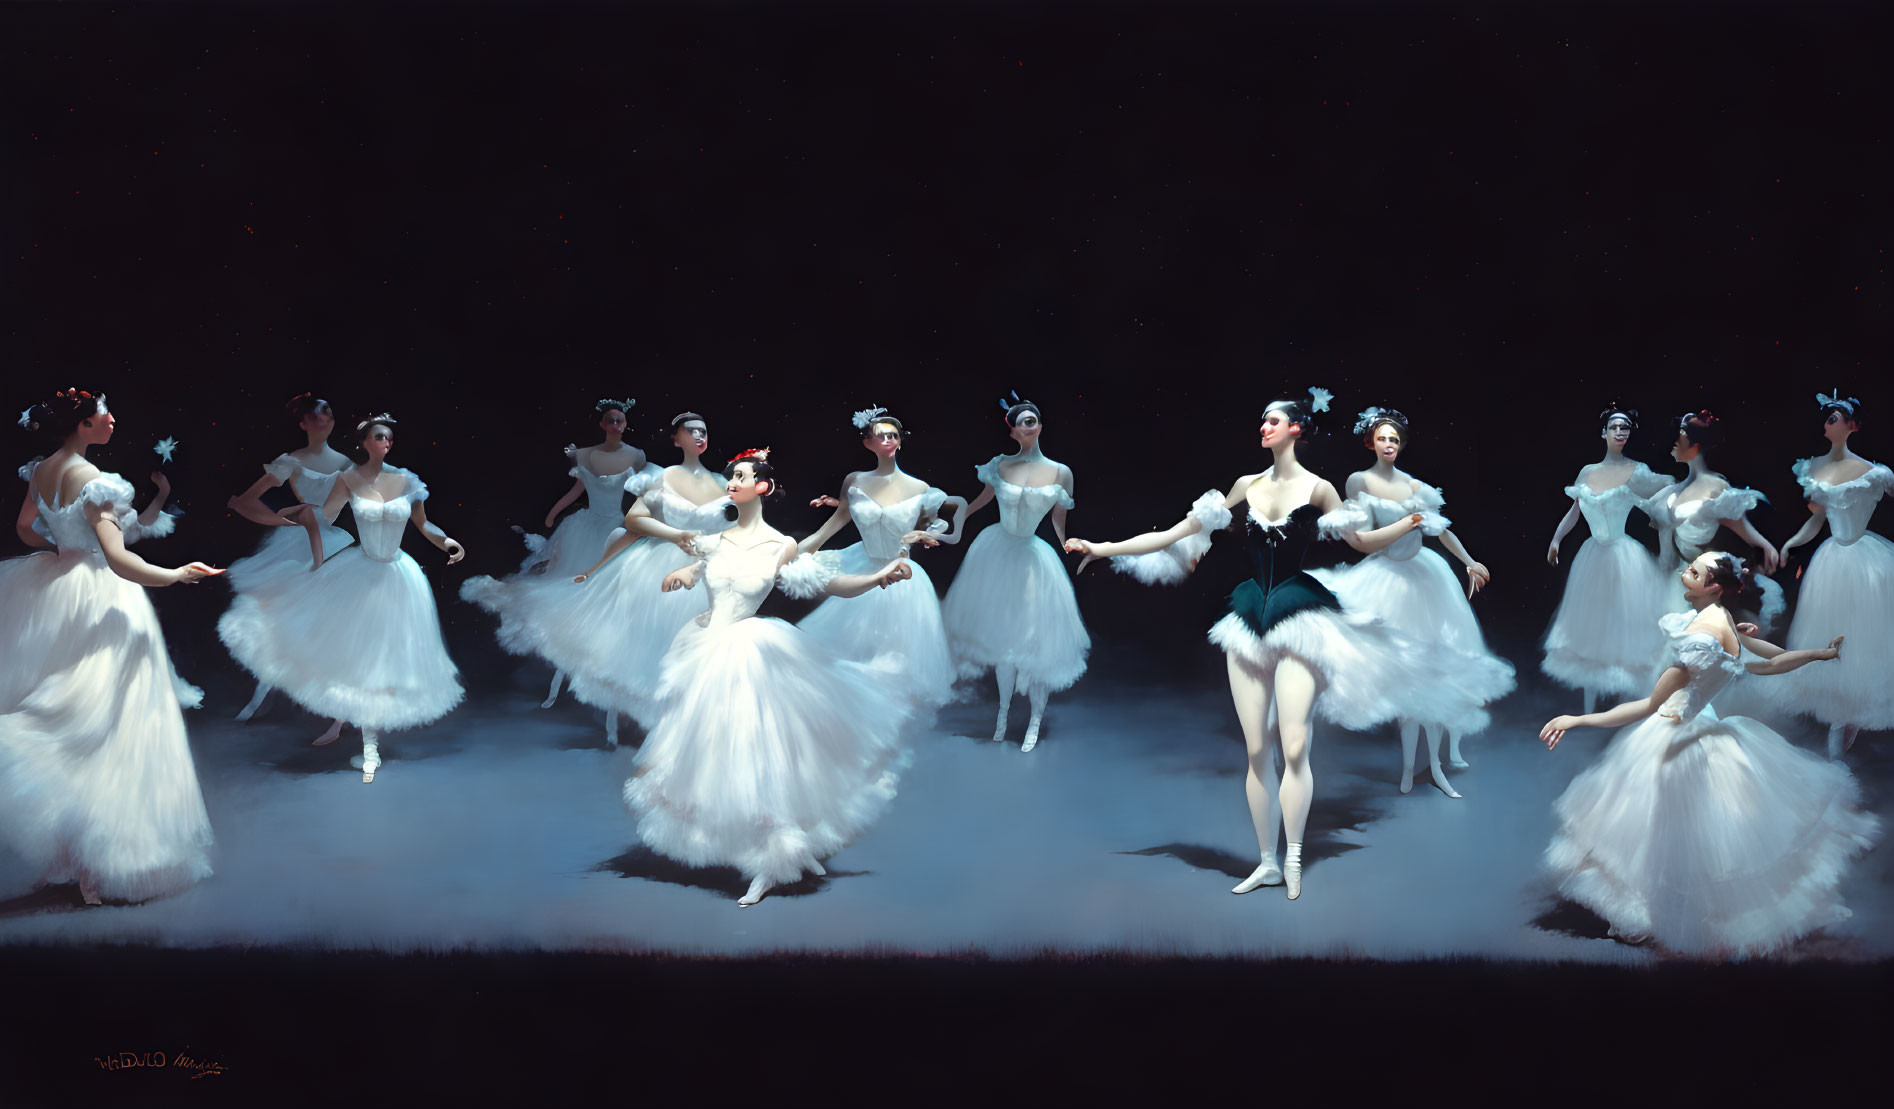 Male lead surrounded by female ballet dancers in white tutus on stage